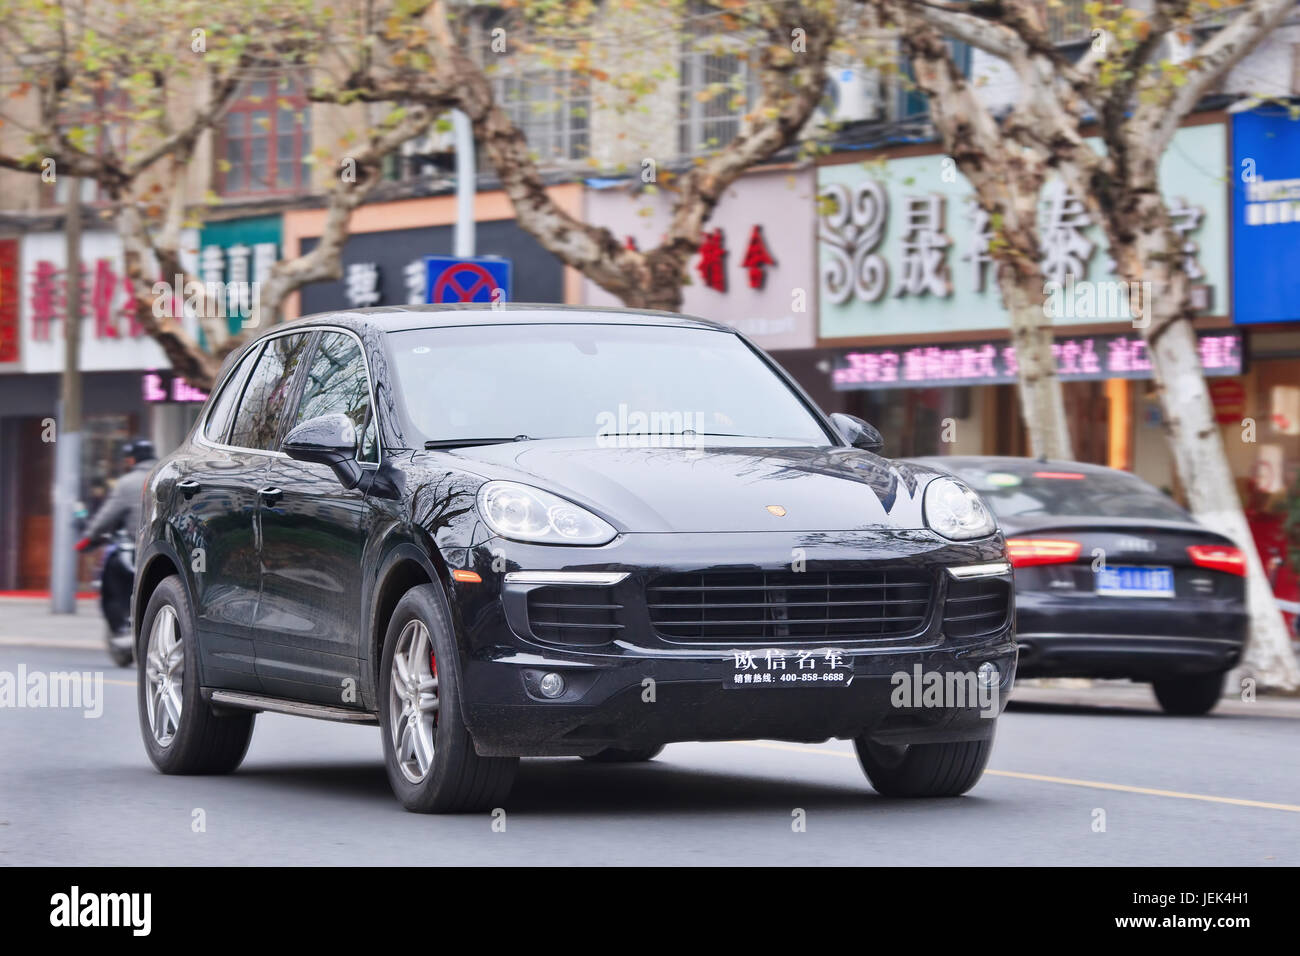 Black Porsche Cayenne. Since 2010, Porsche has tripled China sales. But After government crackdown on conspicuous consumption, luxury market slows. Stock Photo